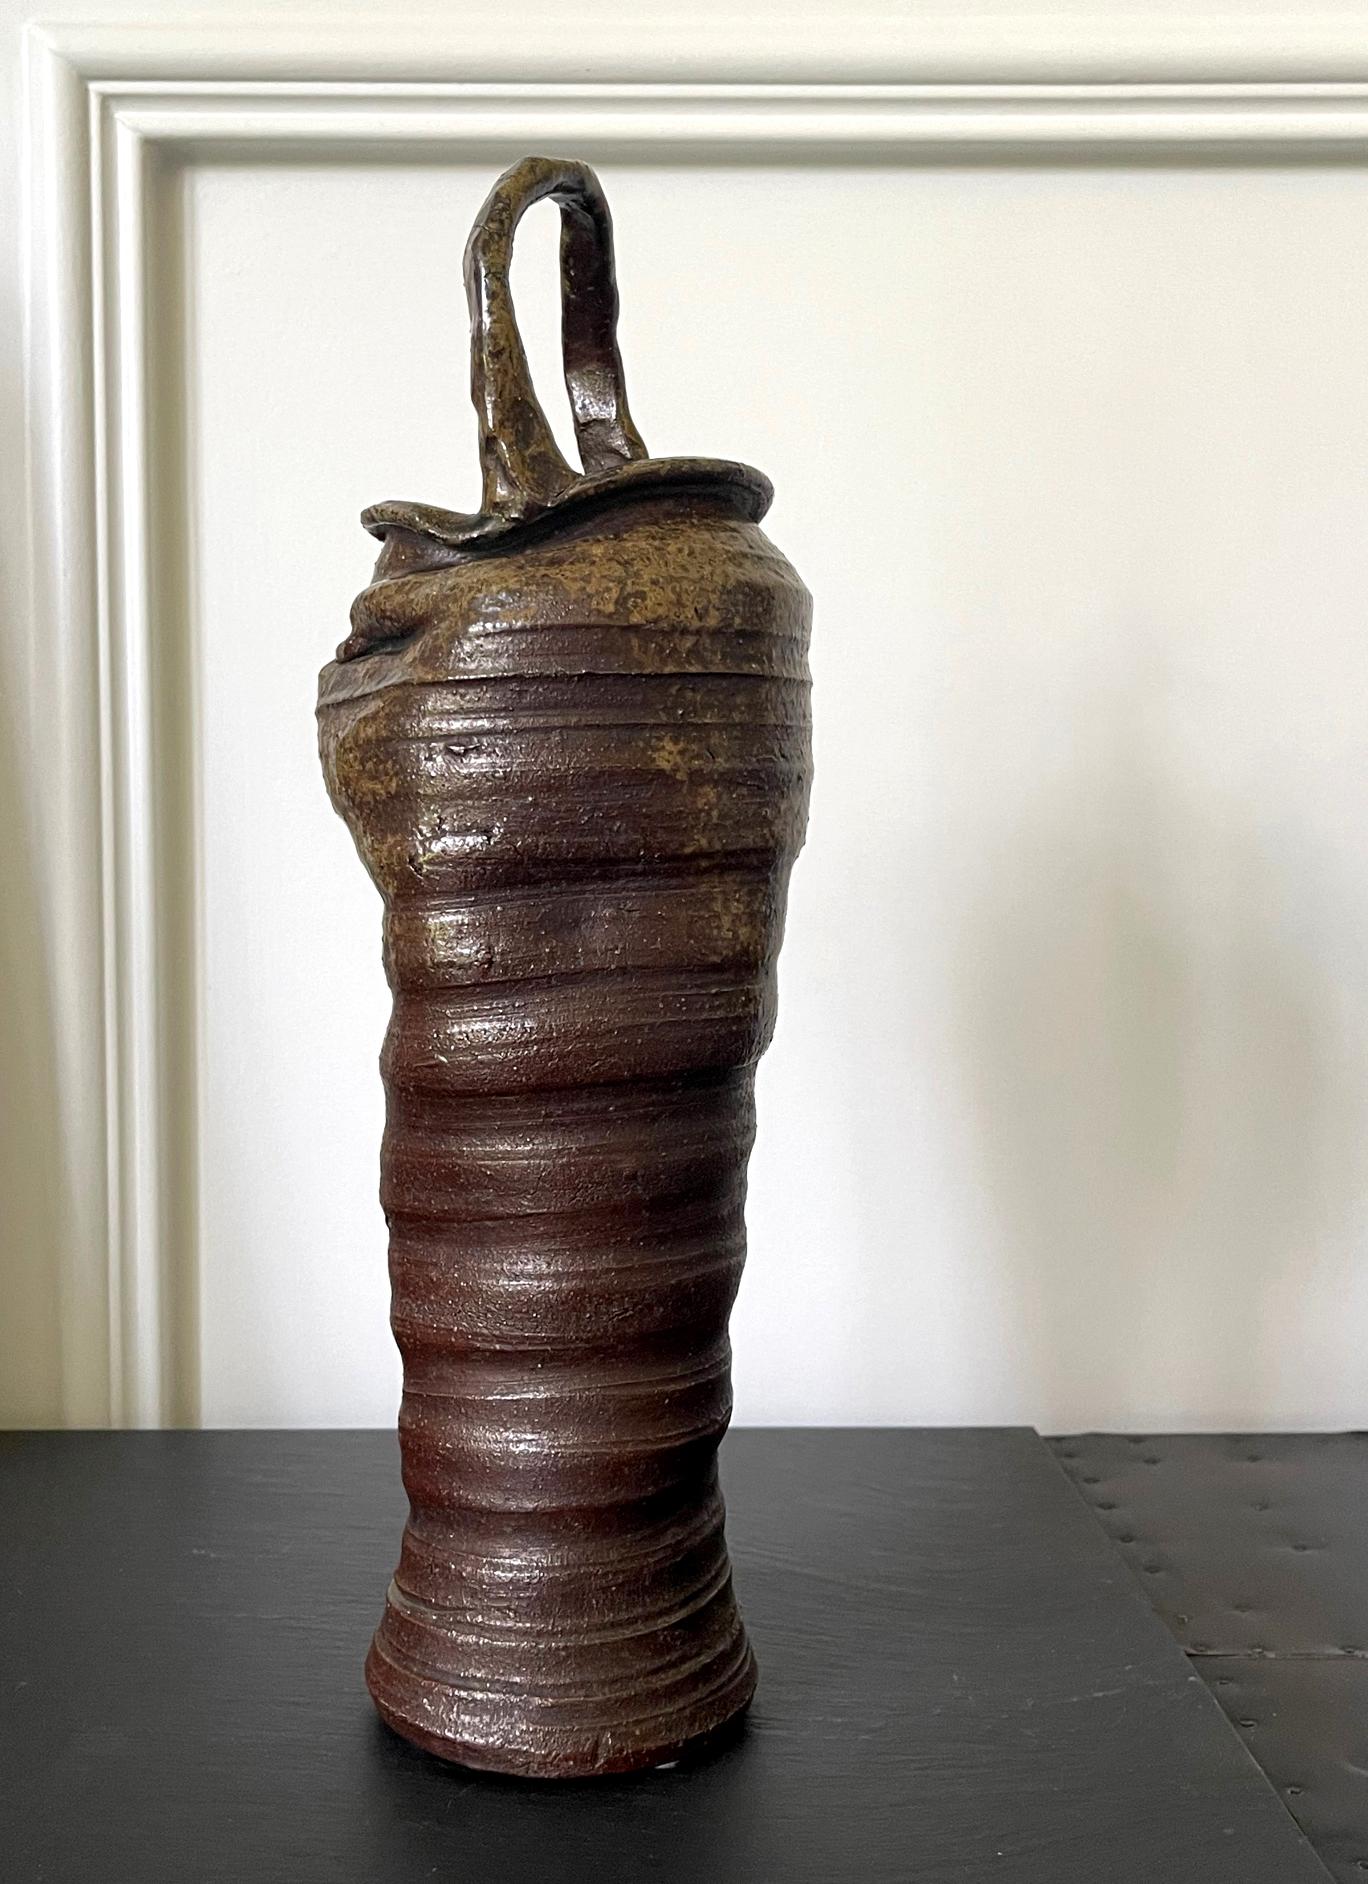 A tall vintage ceramic vase with handle from Japan (20th century) by Nanba Koyo. Made in the tradition of Bizen ware, the vase has a modern aesthetic with a slender and elegant upright form. Intentional potted rings circumvent much of its irregular